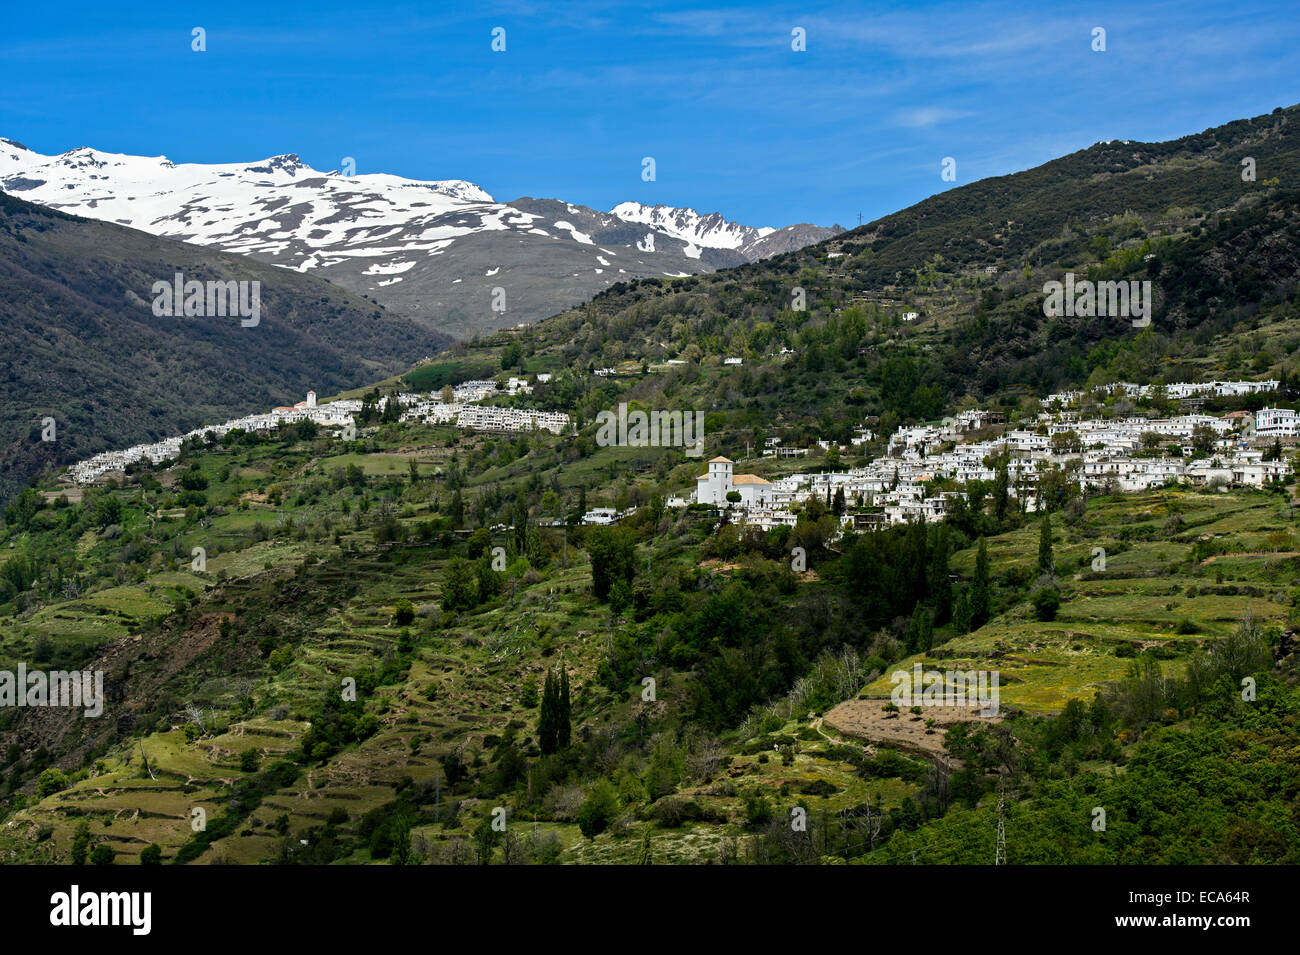 Villages Capileira and Bubion, Alpujarra region, behind Sierra Nevada National Park, Andalusia, Spain Stock Photo